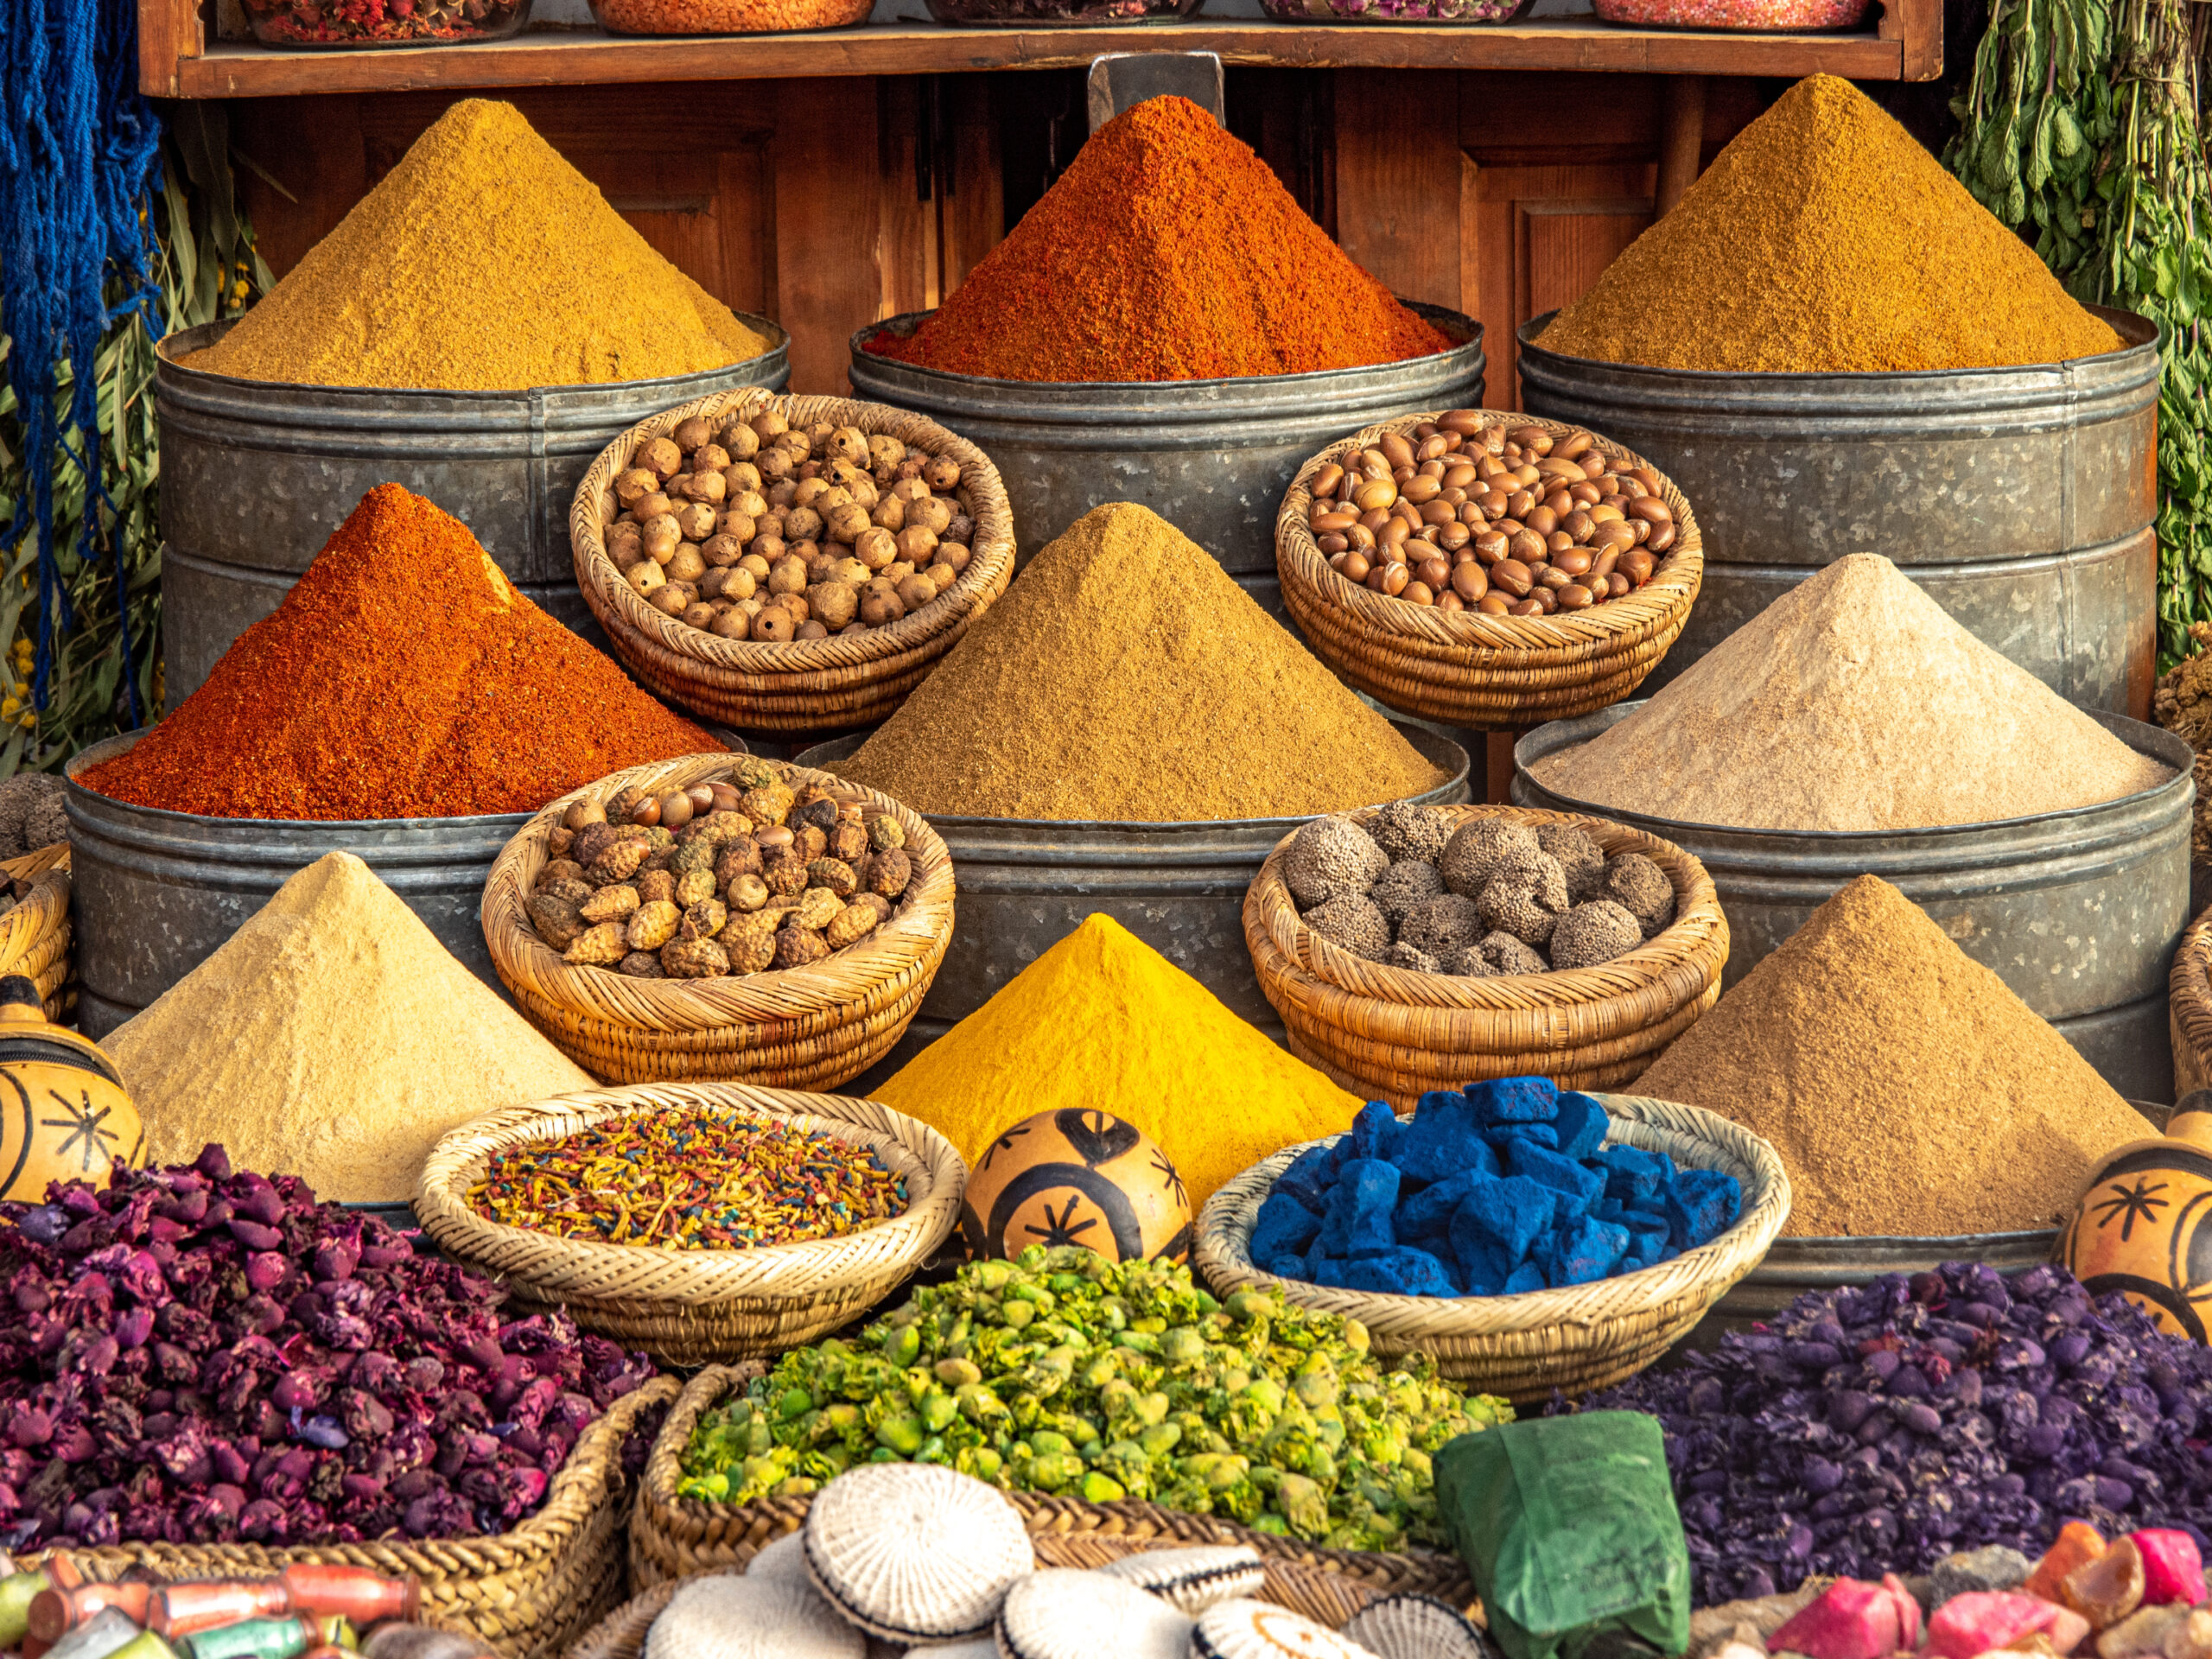 production-services-and-filming-in-marocco-colorful-spices-and-dyes-at-souk-market